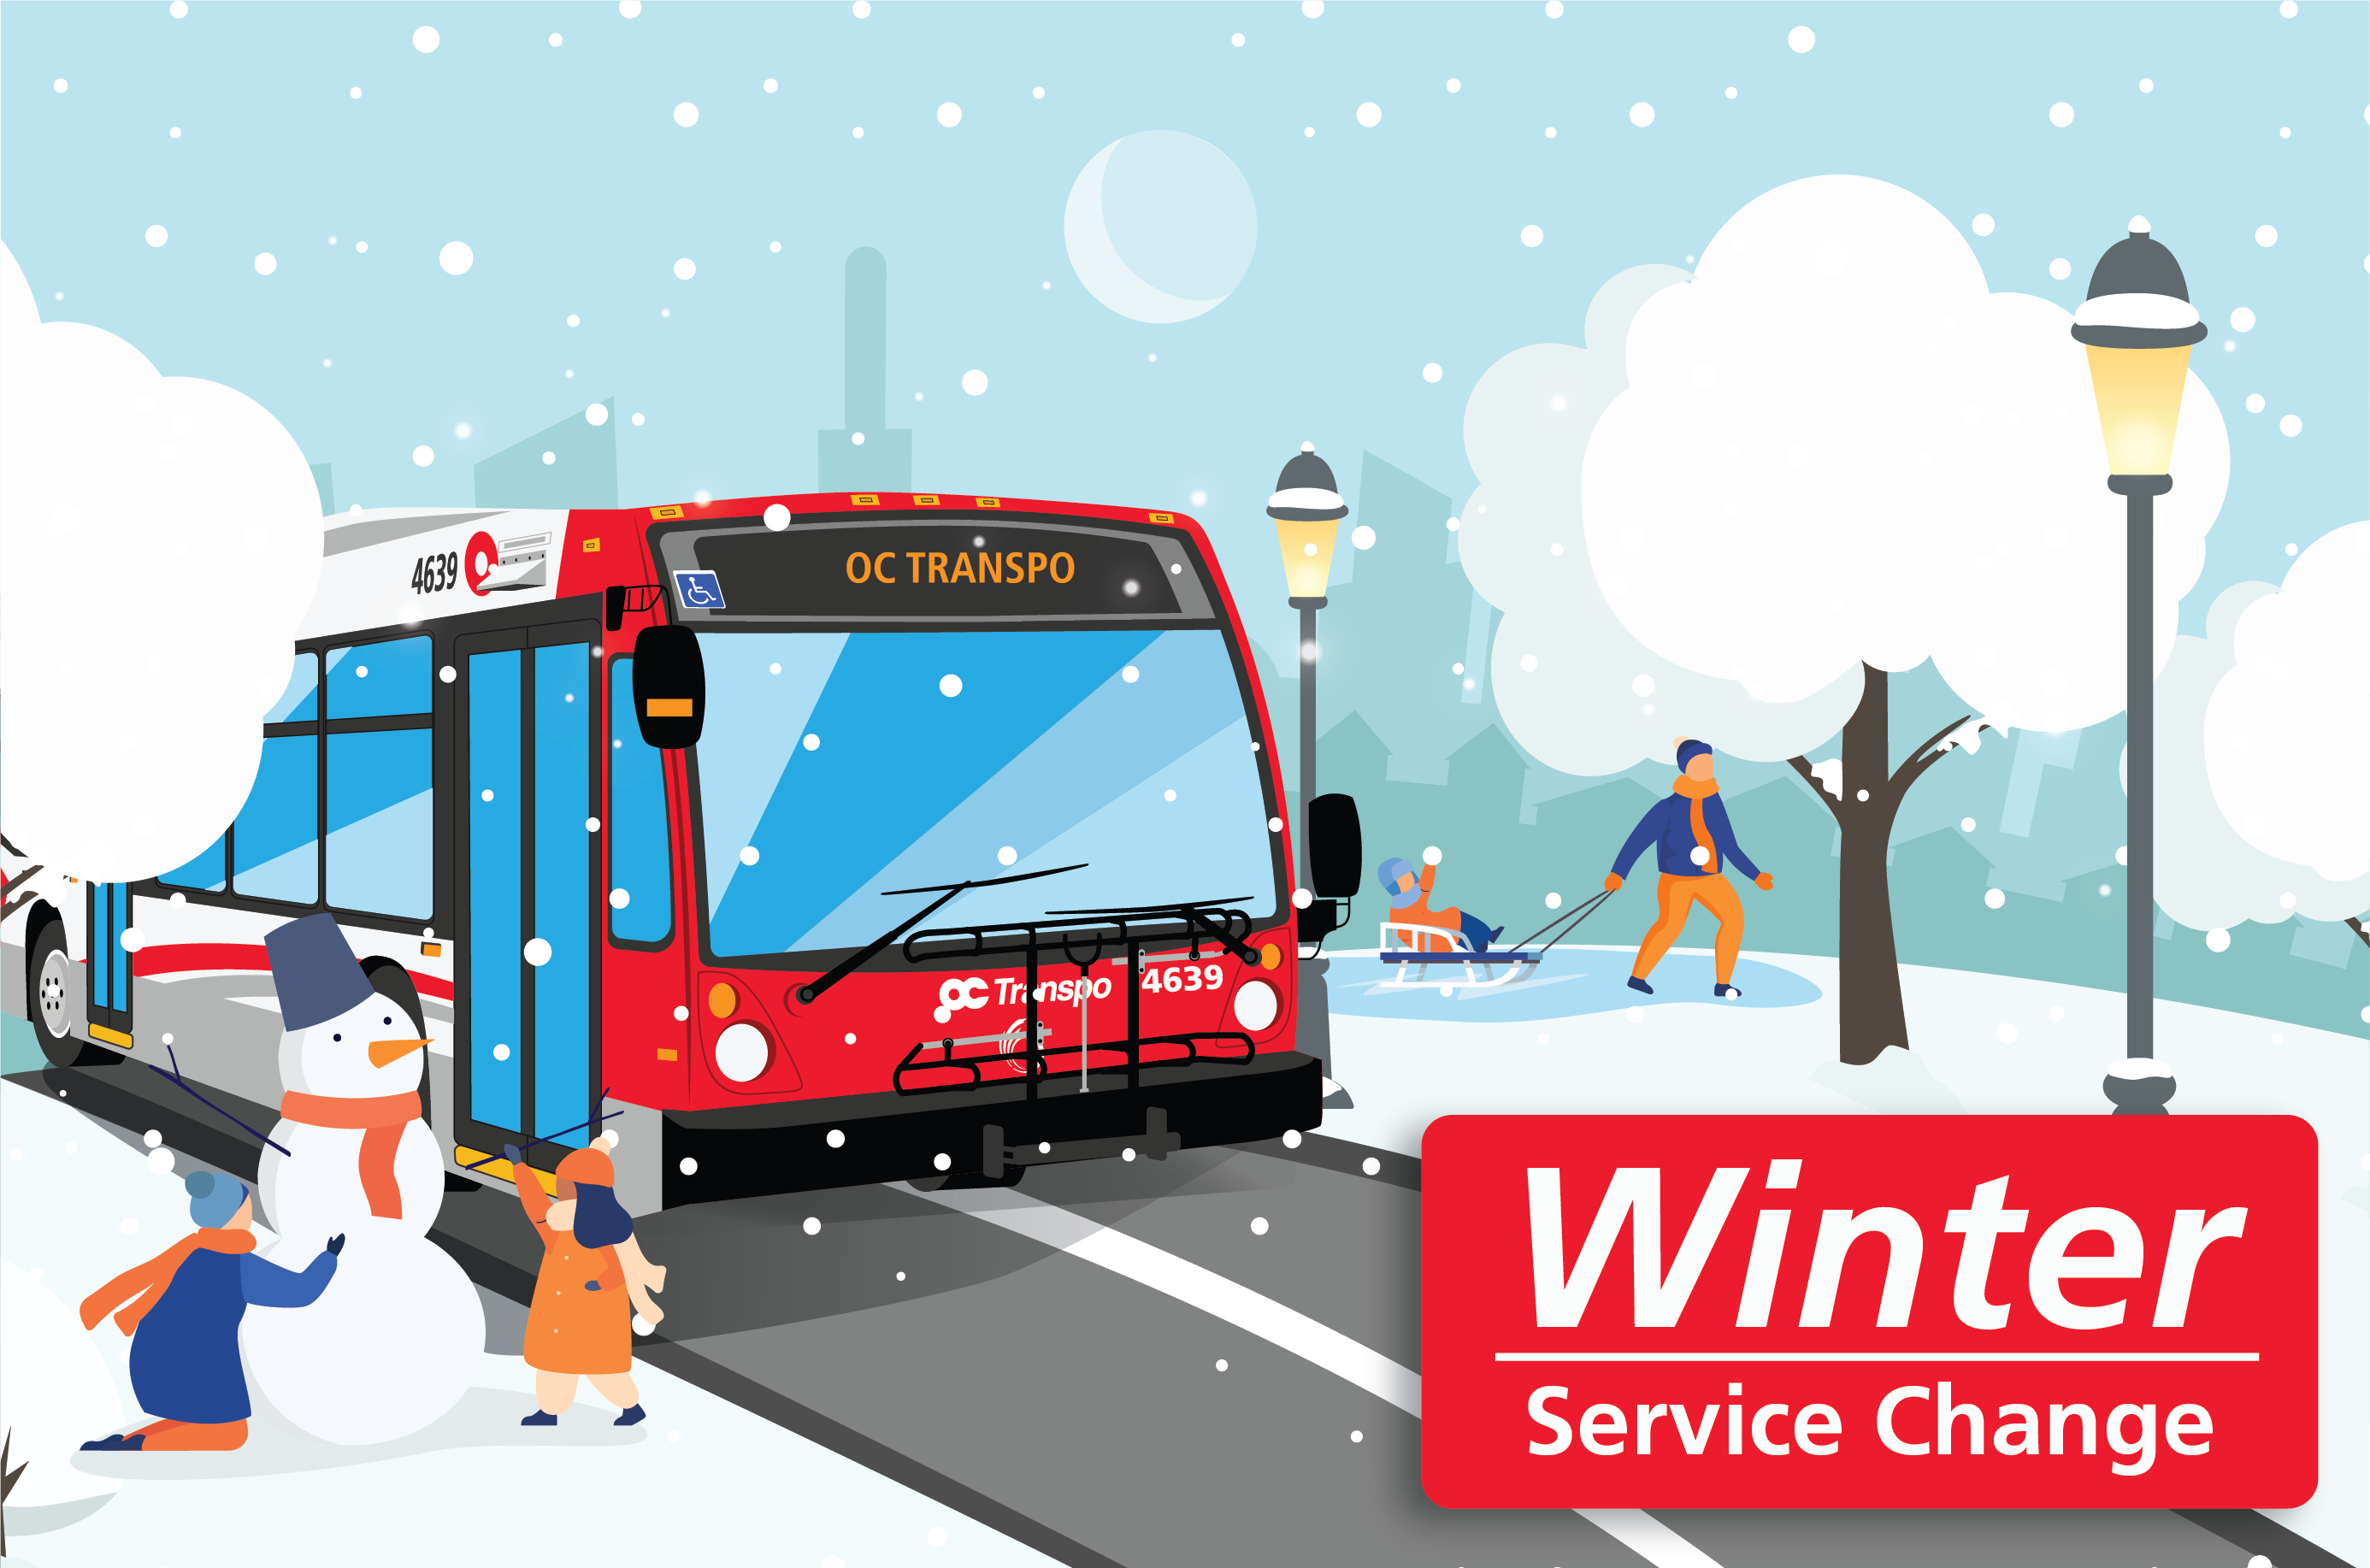 Image - Winter service changes